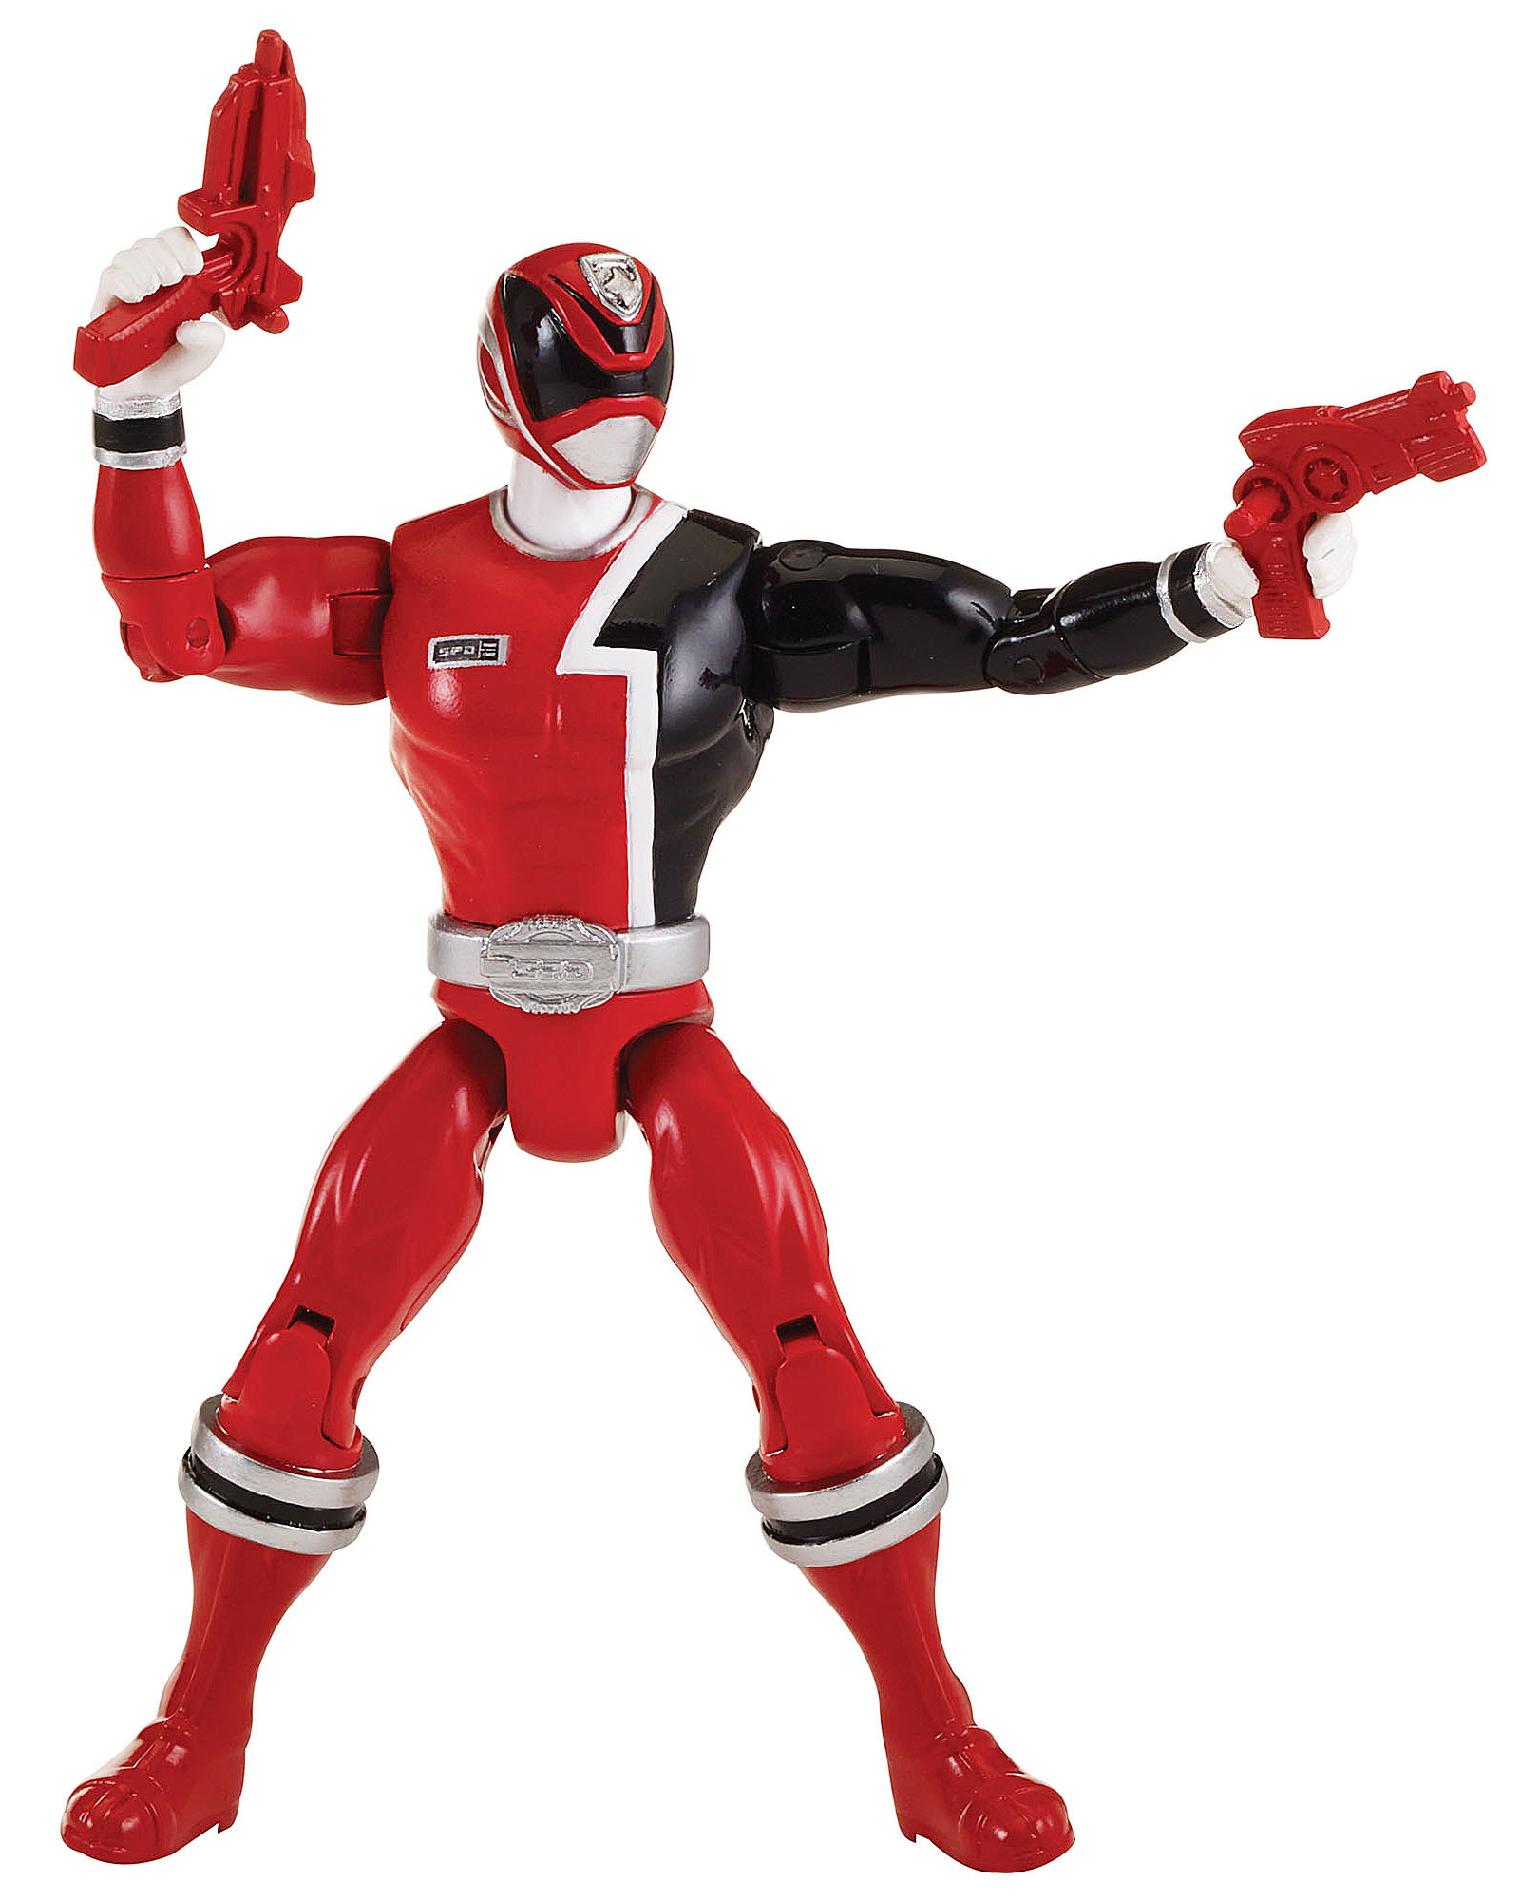 Power rangers spd toy guide